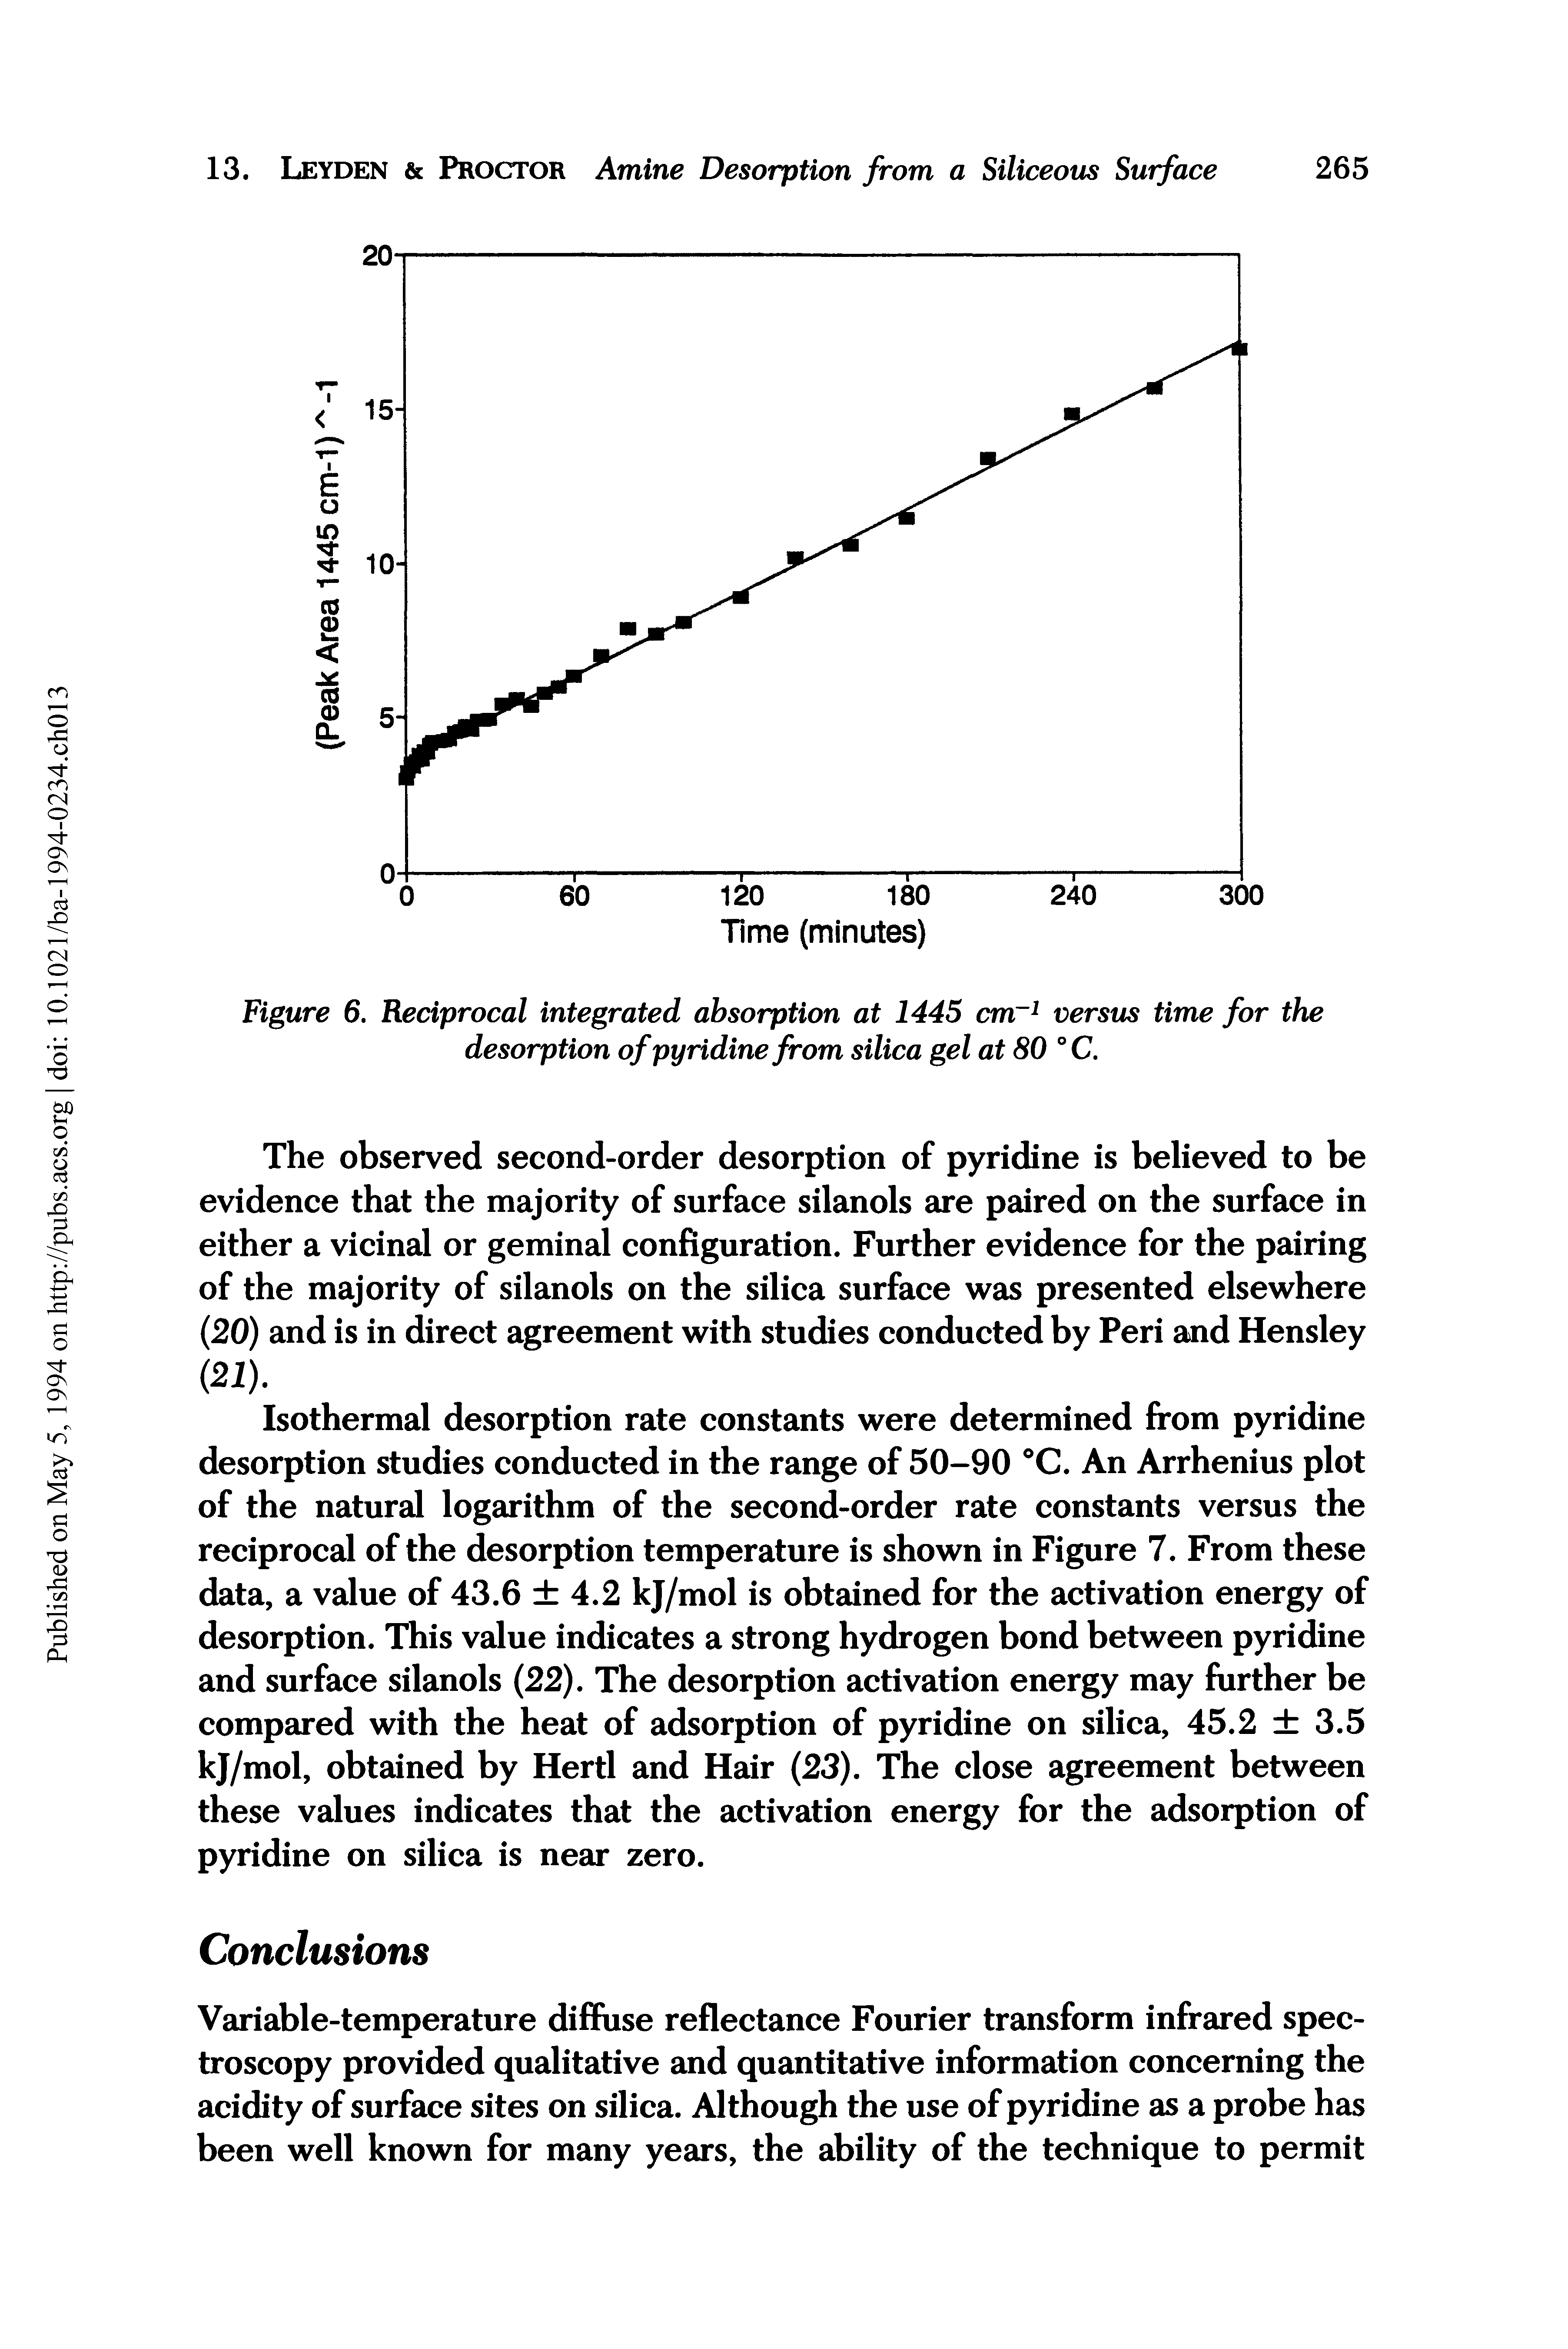 Figure 6. Reciprocal integrated absorption at 1445 cm-1 versus time for the desorption of pyridine from silica gel at 80 °C.